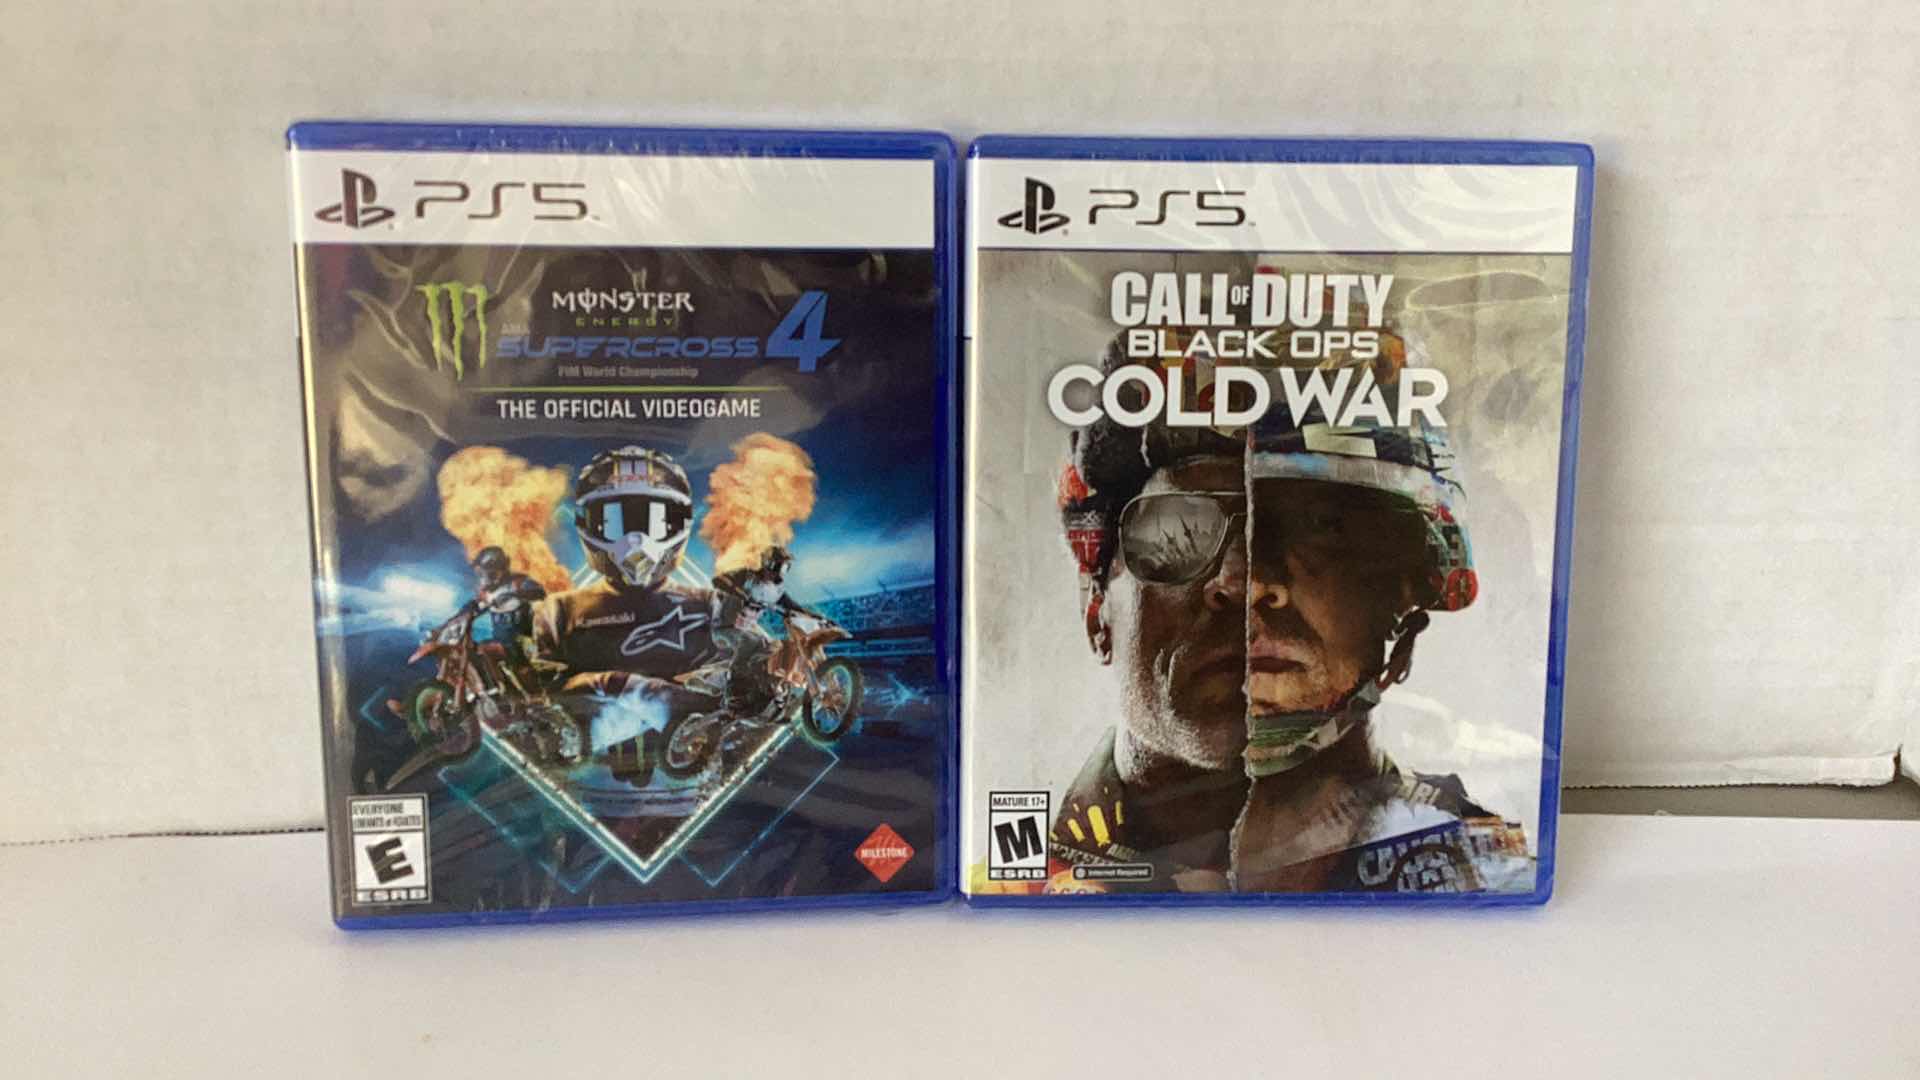 Photo 1 of 2 NEW PS5 GAMES: MONSTER ENERGY SUPERCROSS 4 AND CALL OF DUTY BLACK OPS COLD WAR